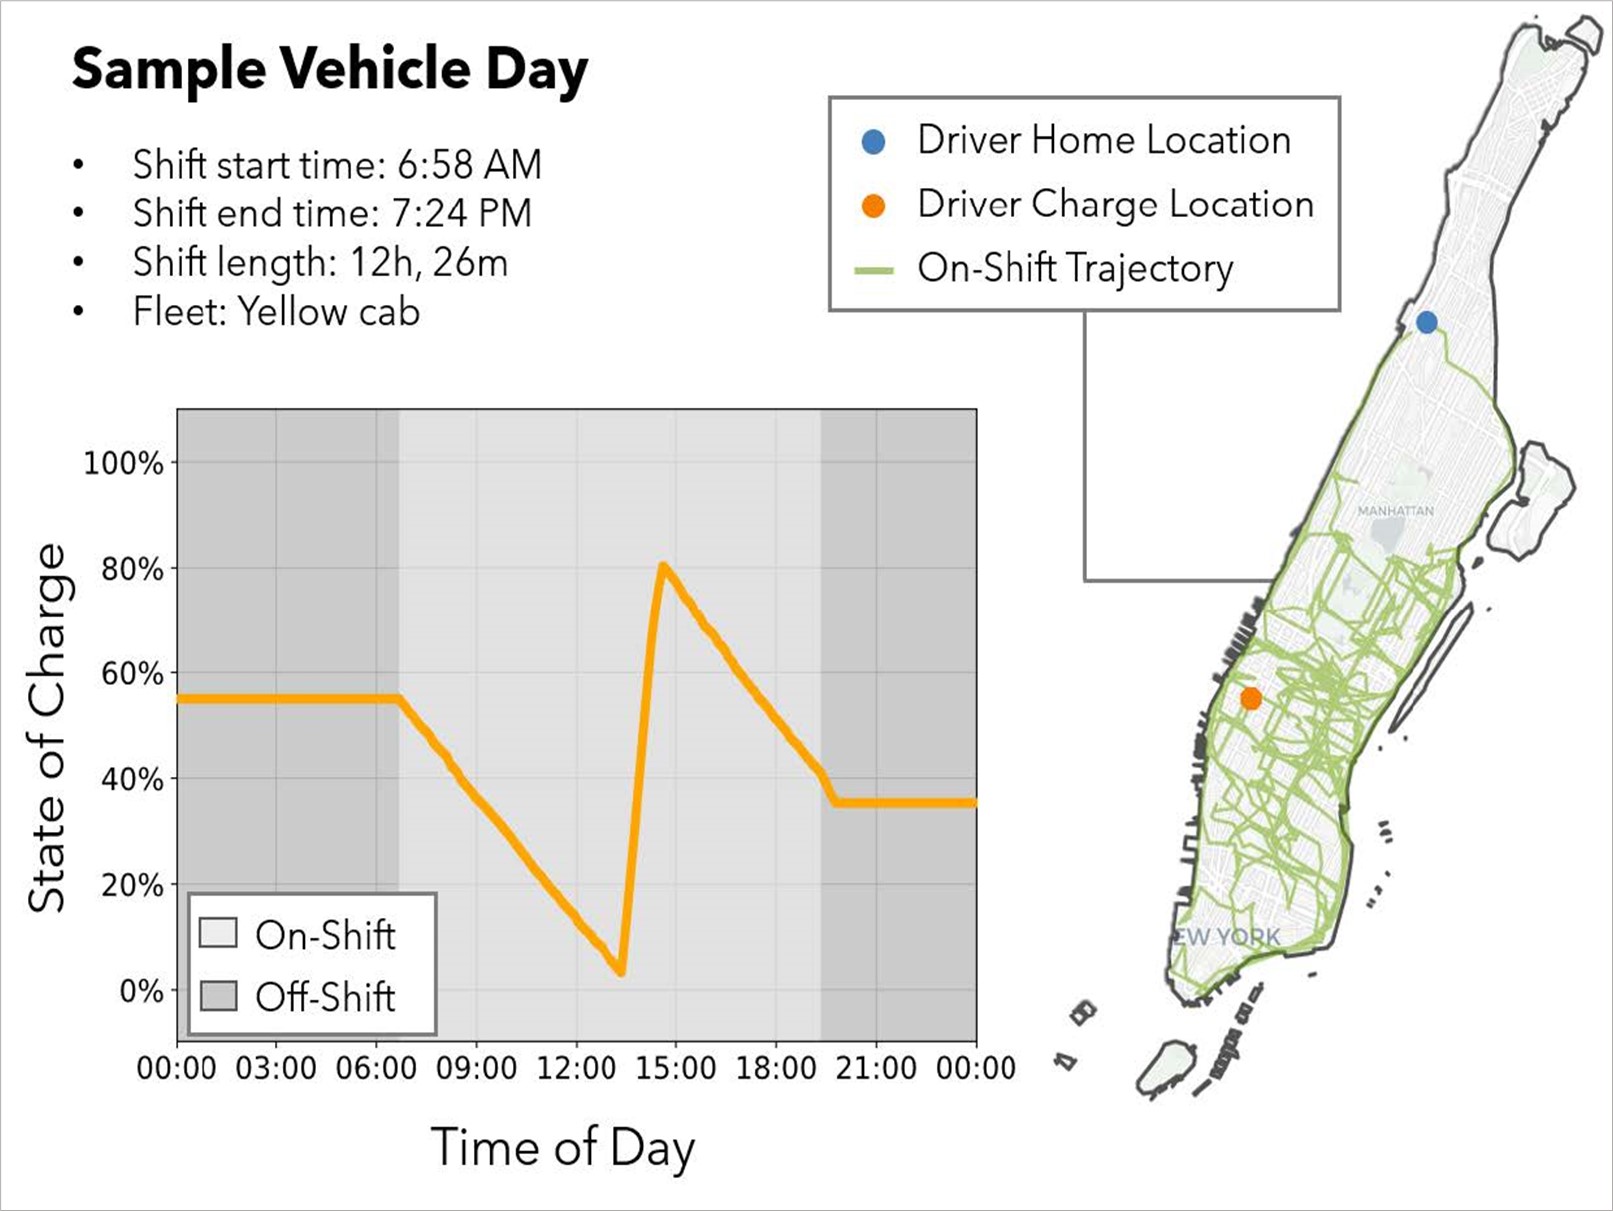 Image shows a sample vehicle day with shift start time at 6:58 AM, shift end time at 7:24 PM, shift length 12h, 26m, and fleet: Yellow Cab. Driver home location and charge location are shown on a map with green lines for the on-shift trajectory.